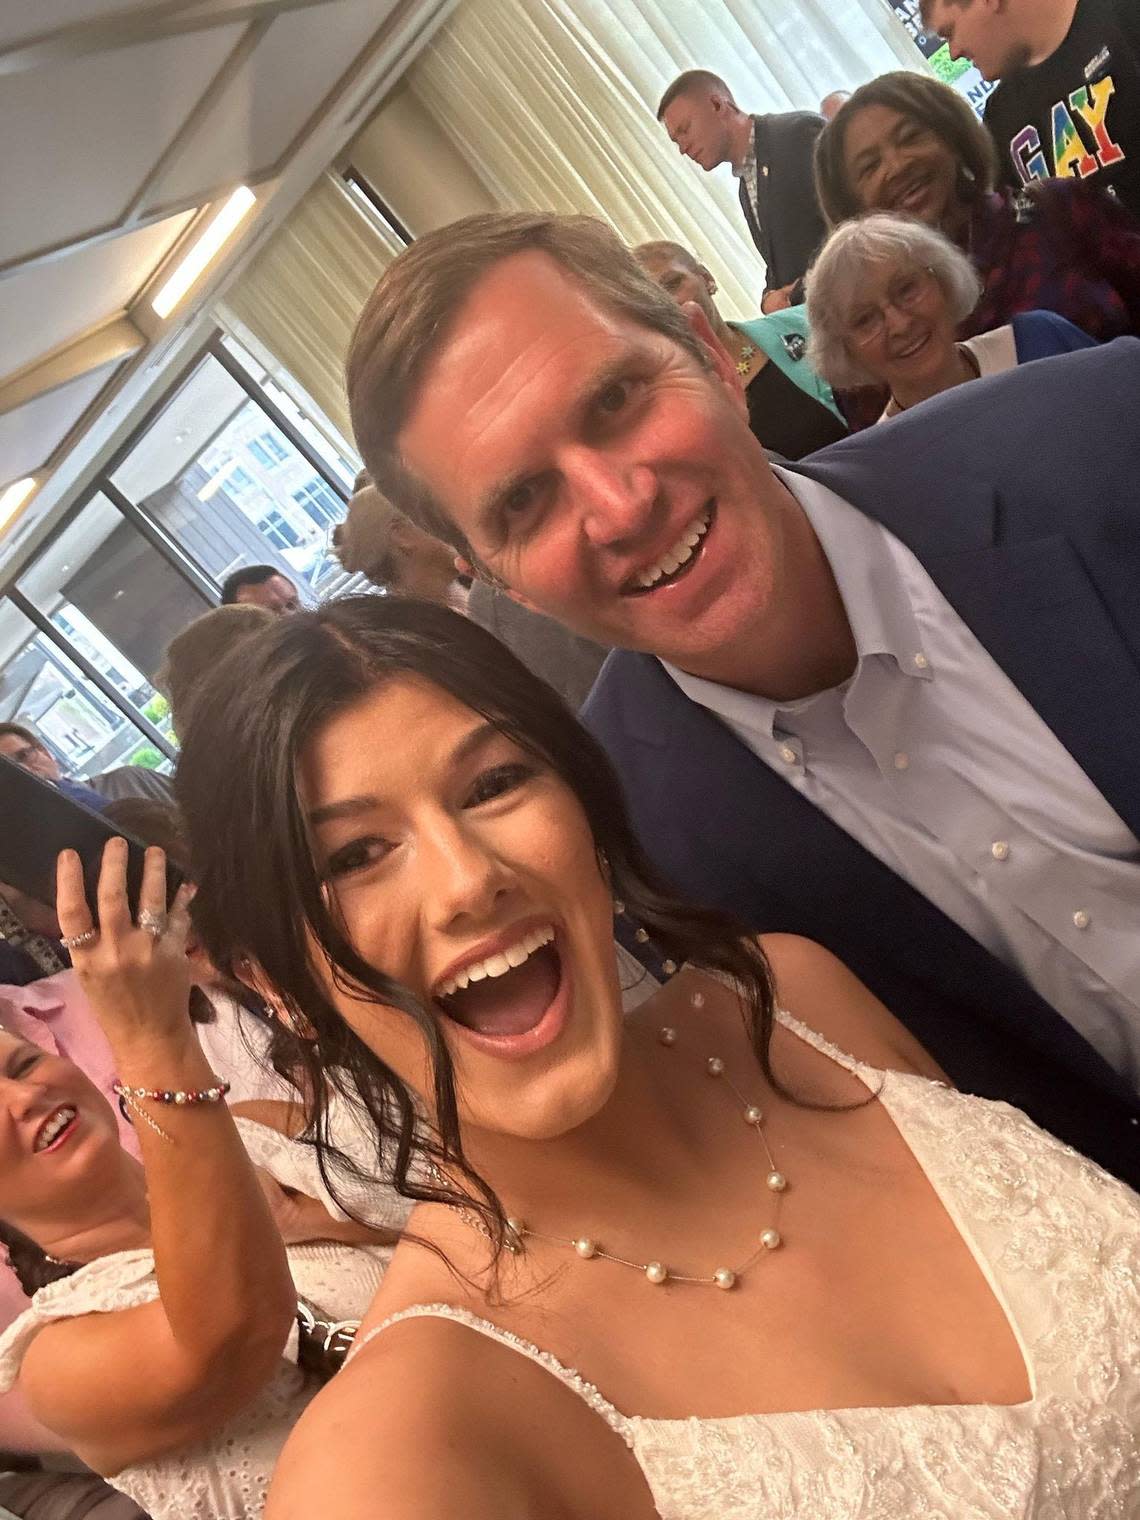 Delaney Blackwell took a selfie with Andy Beshear at an Ashland hotel shortly before her wedding.